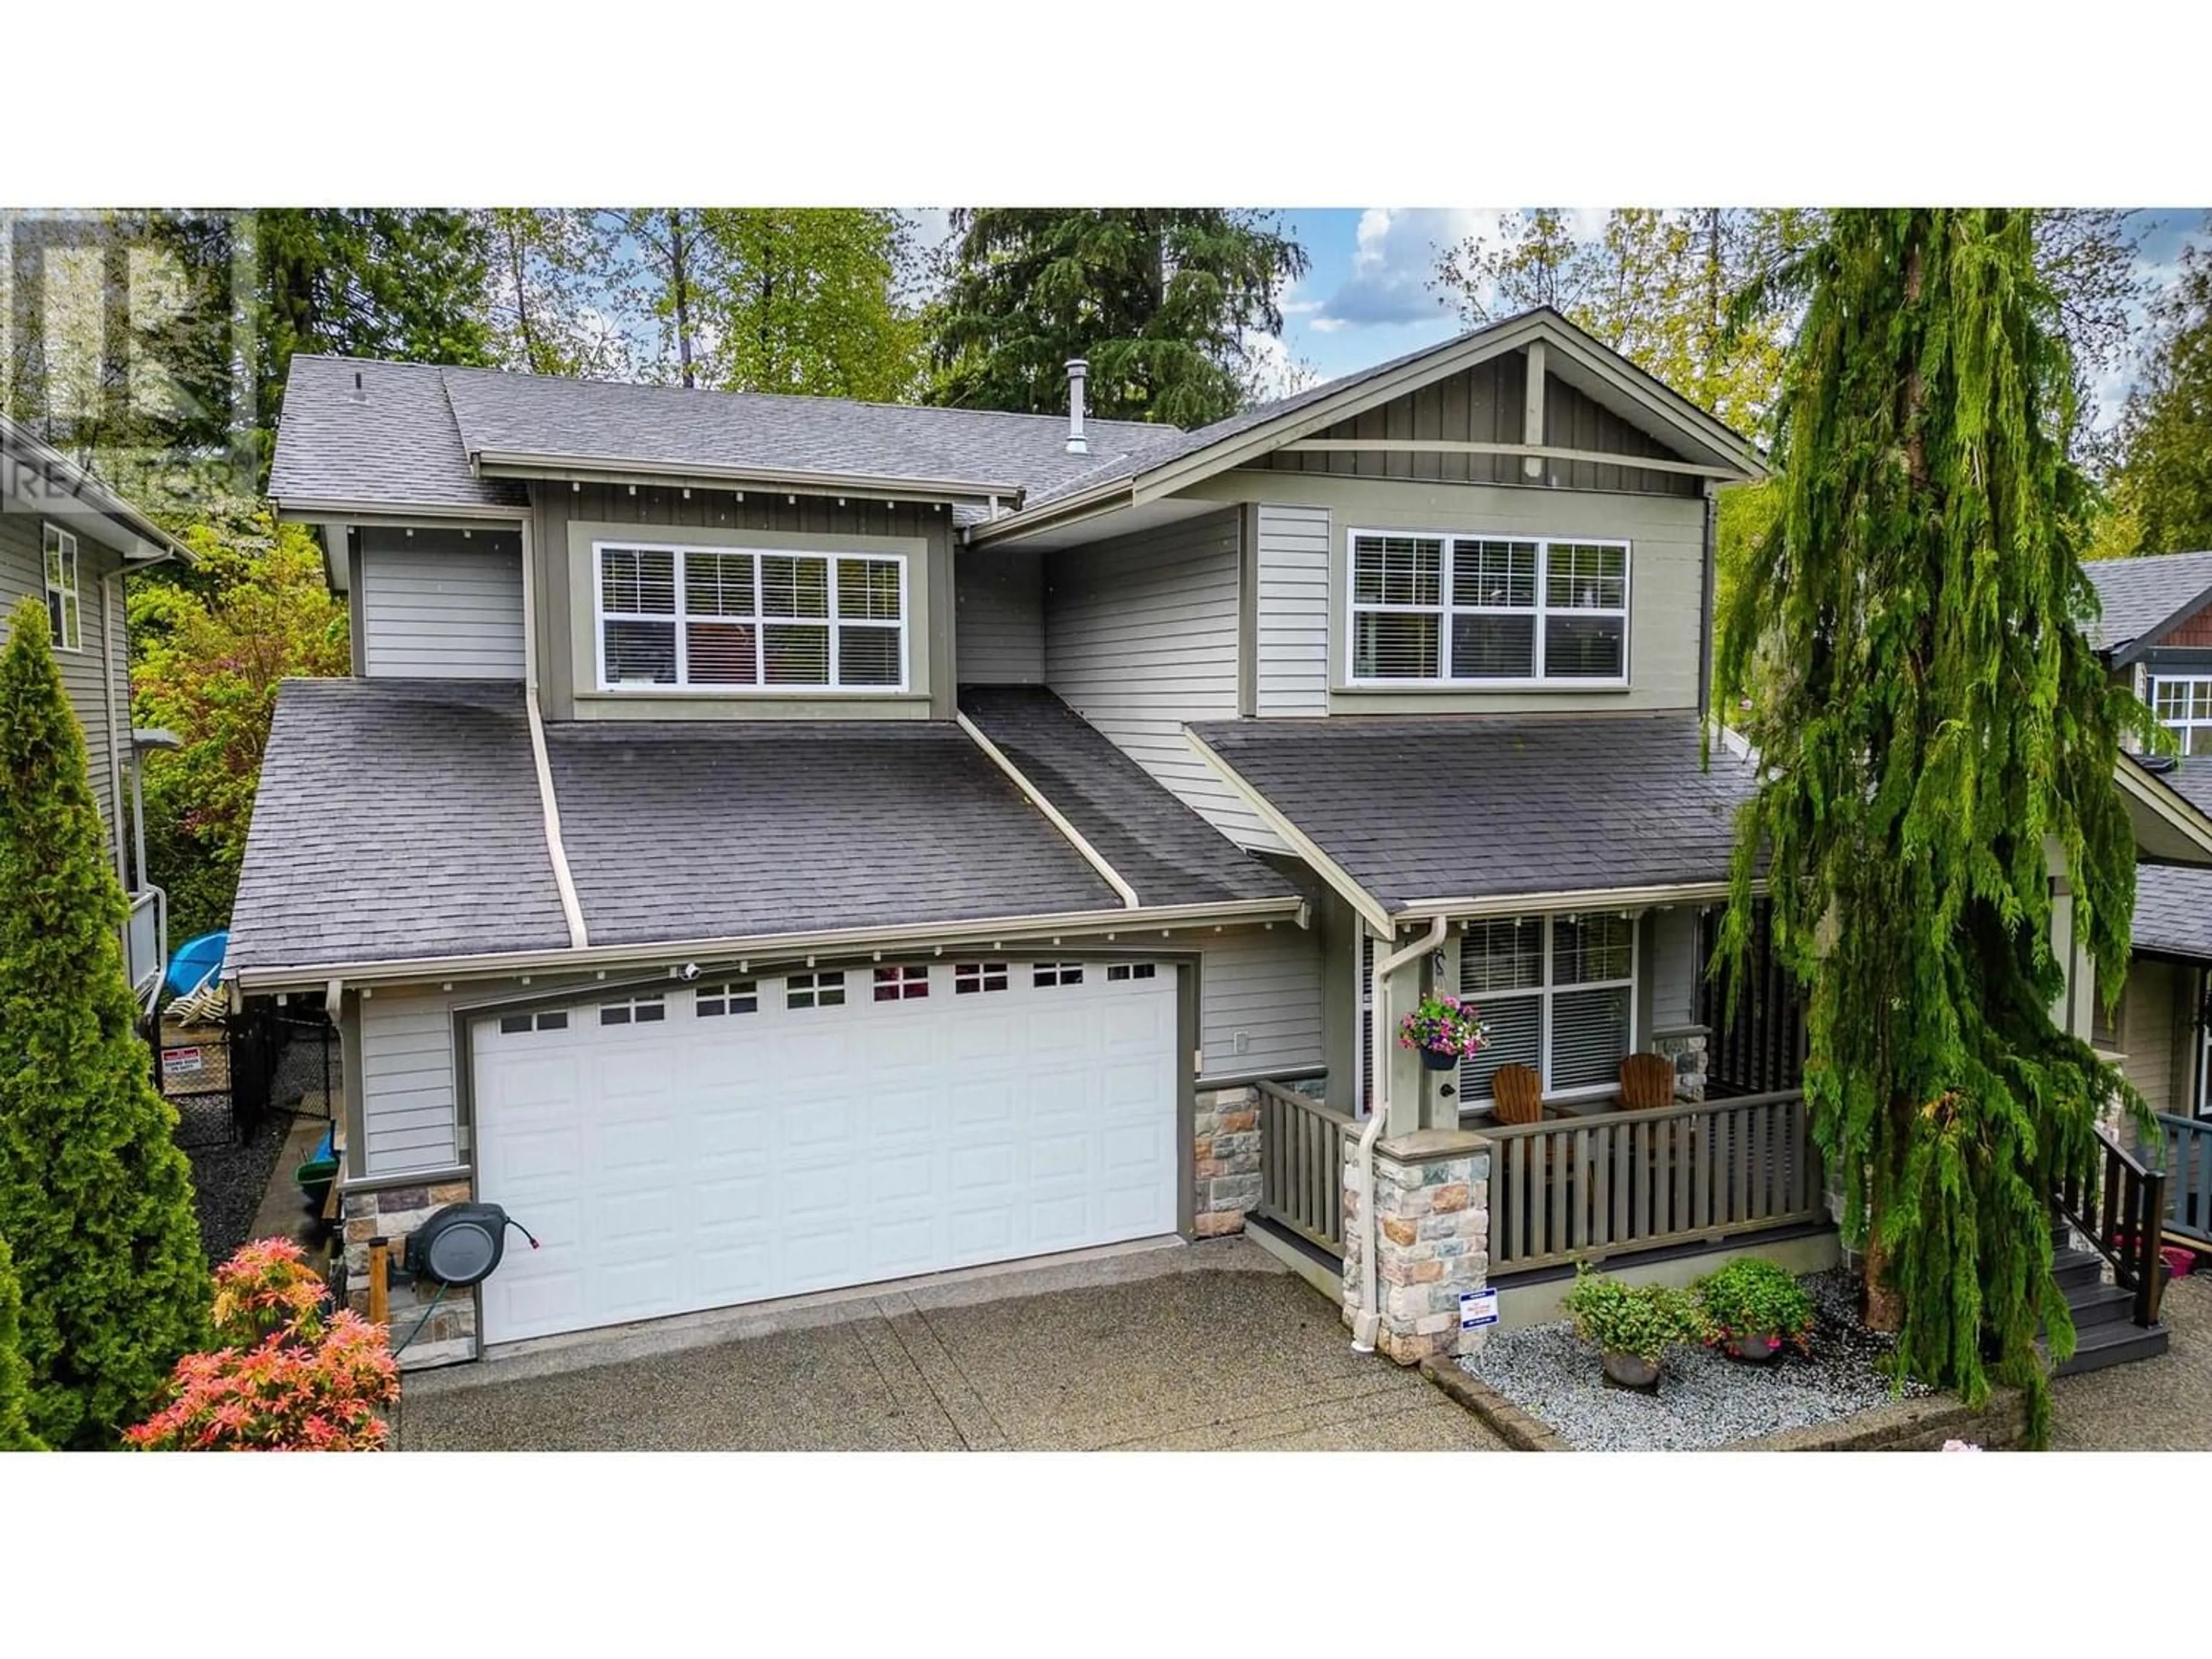 Frontside or backside of a home for 23398 133 AVENUE, Maple Ridge British Columbia V4R2W6